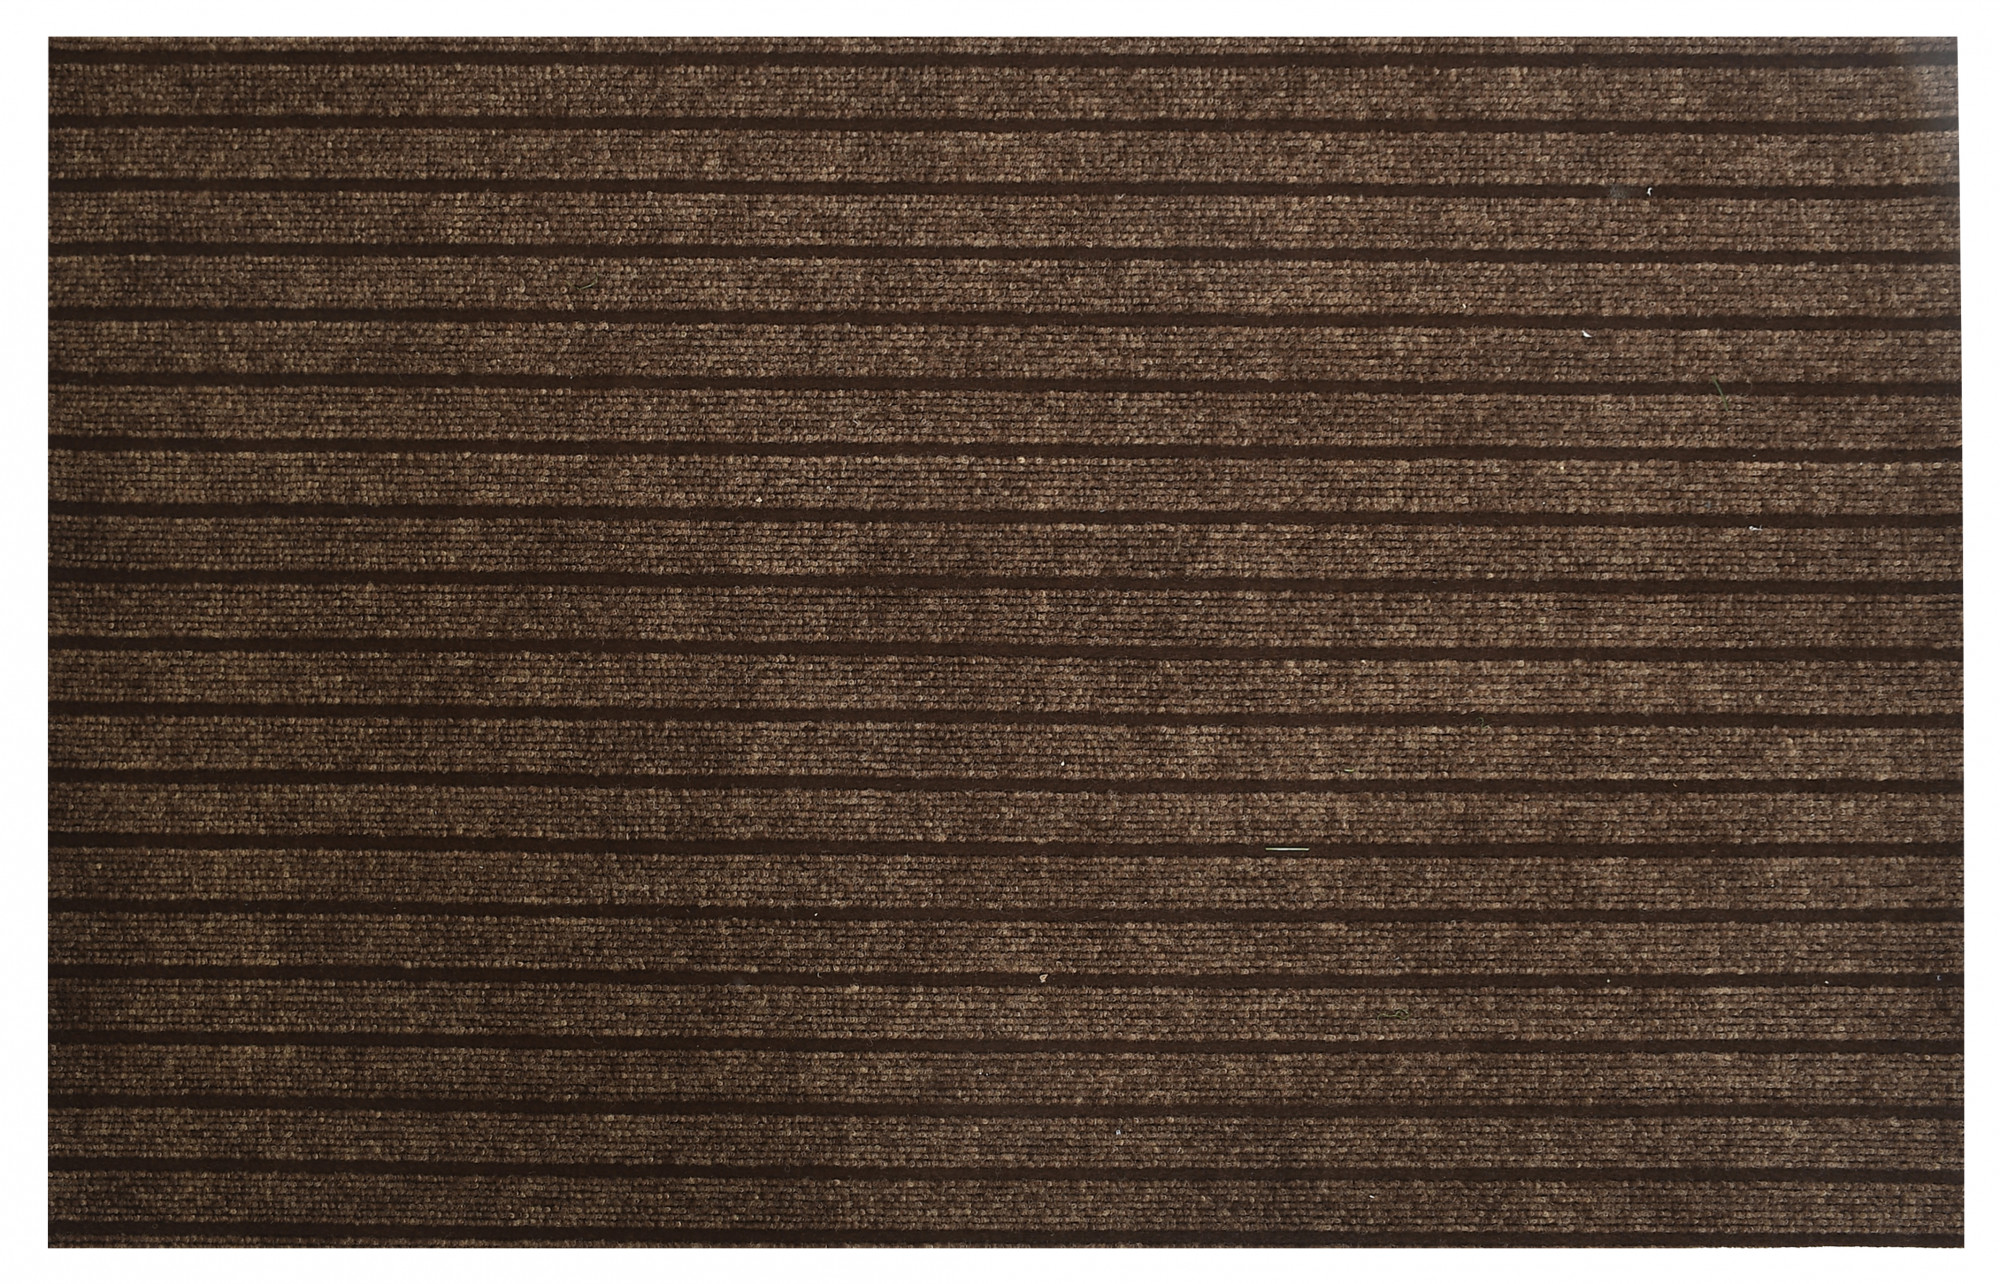 Kuber Industries All Weather Entry and Back Yard Door Mat, Indoor and Outdoor Safe, Non-Slip Rubber Backing, Absorbent and Waterproof, Dirt Trapping Rugs for Entryway -24